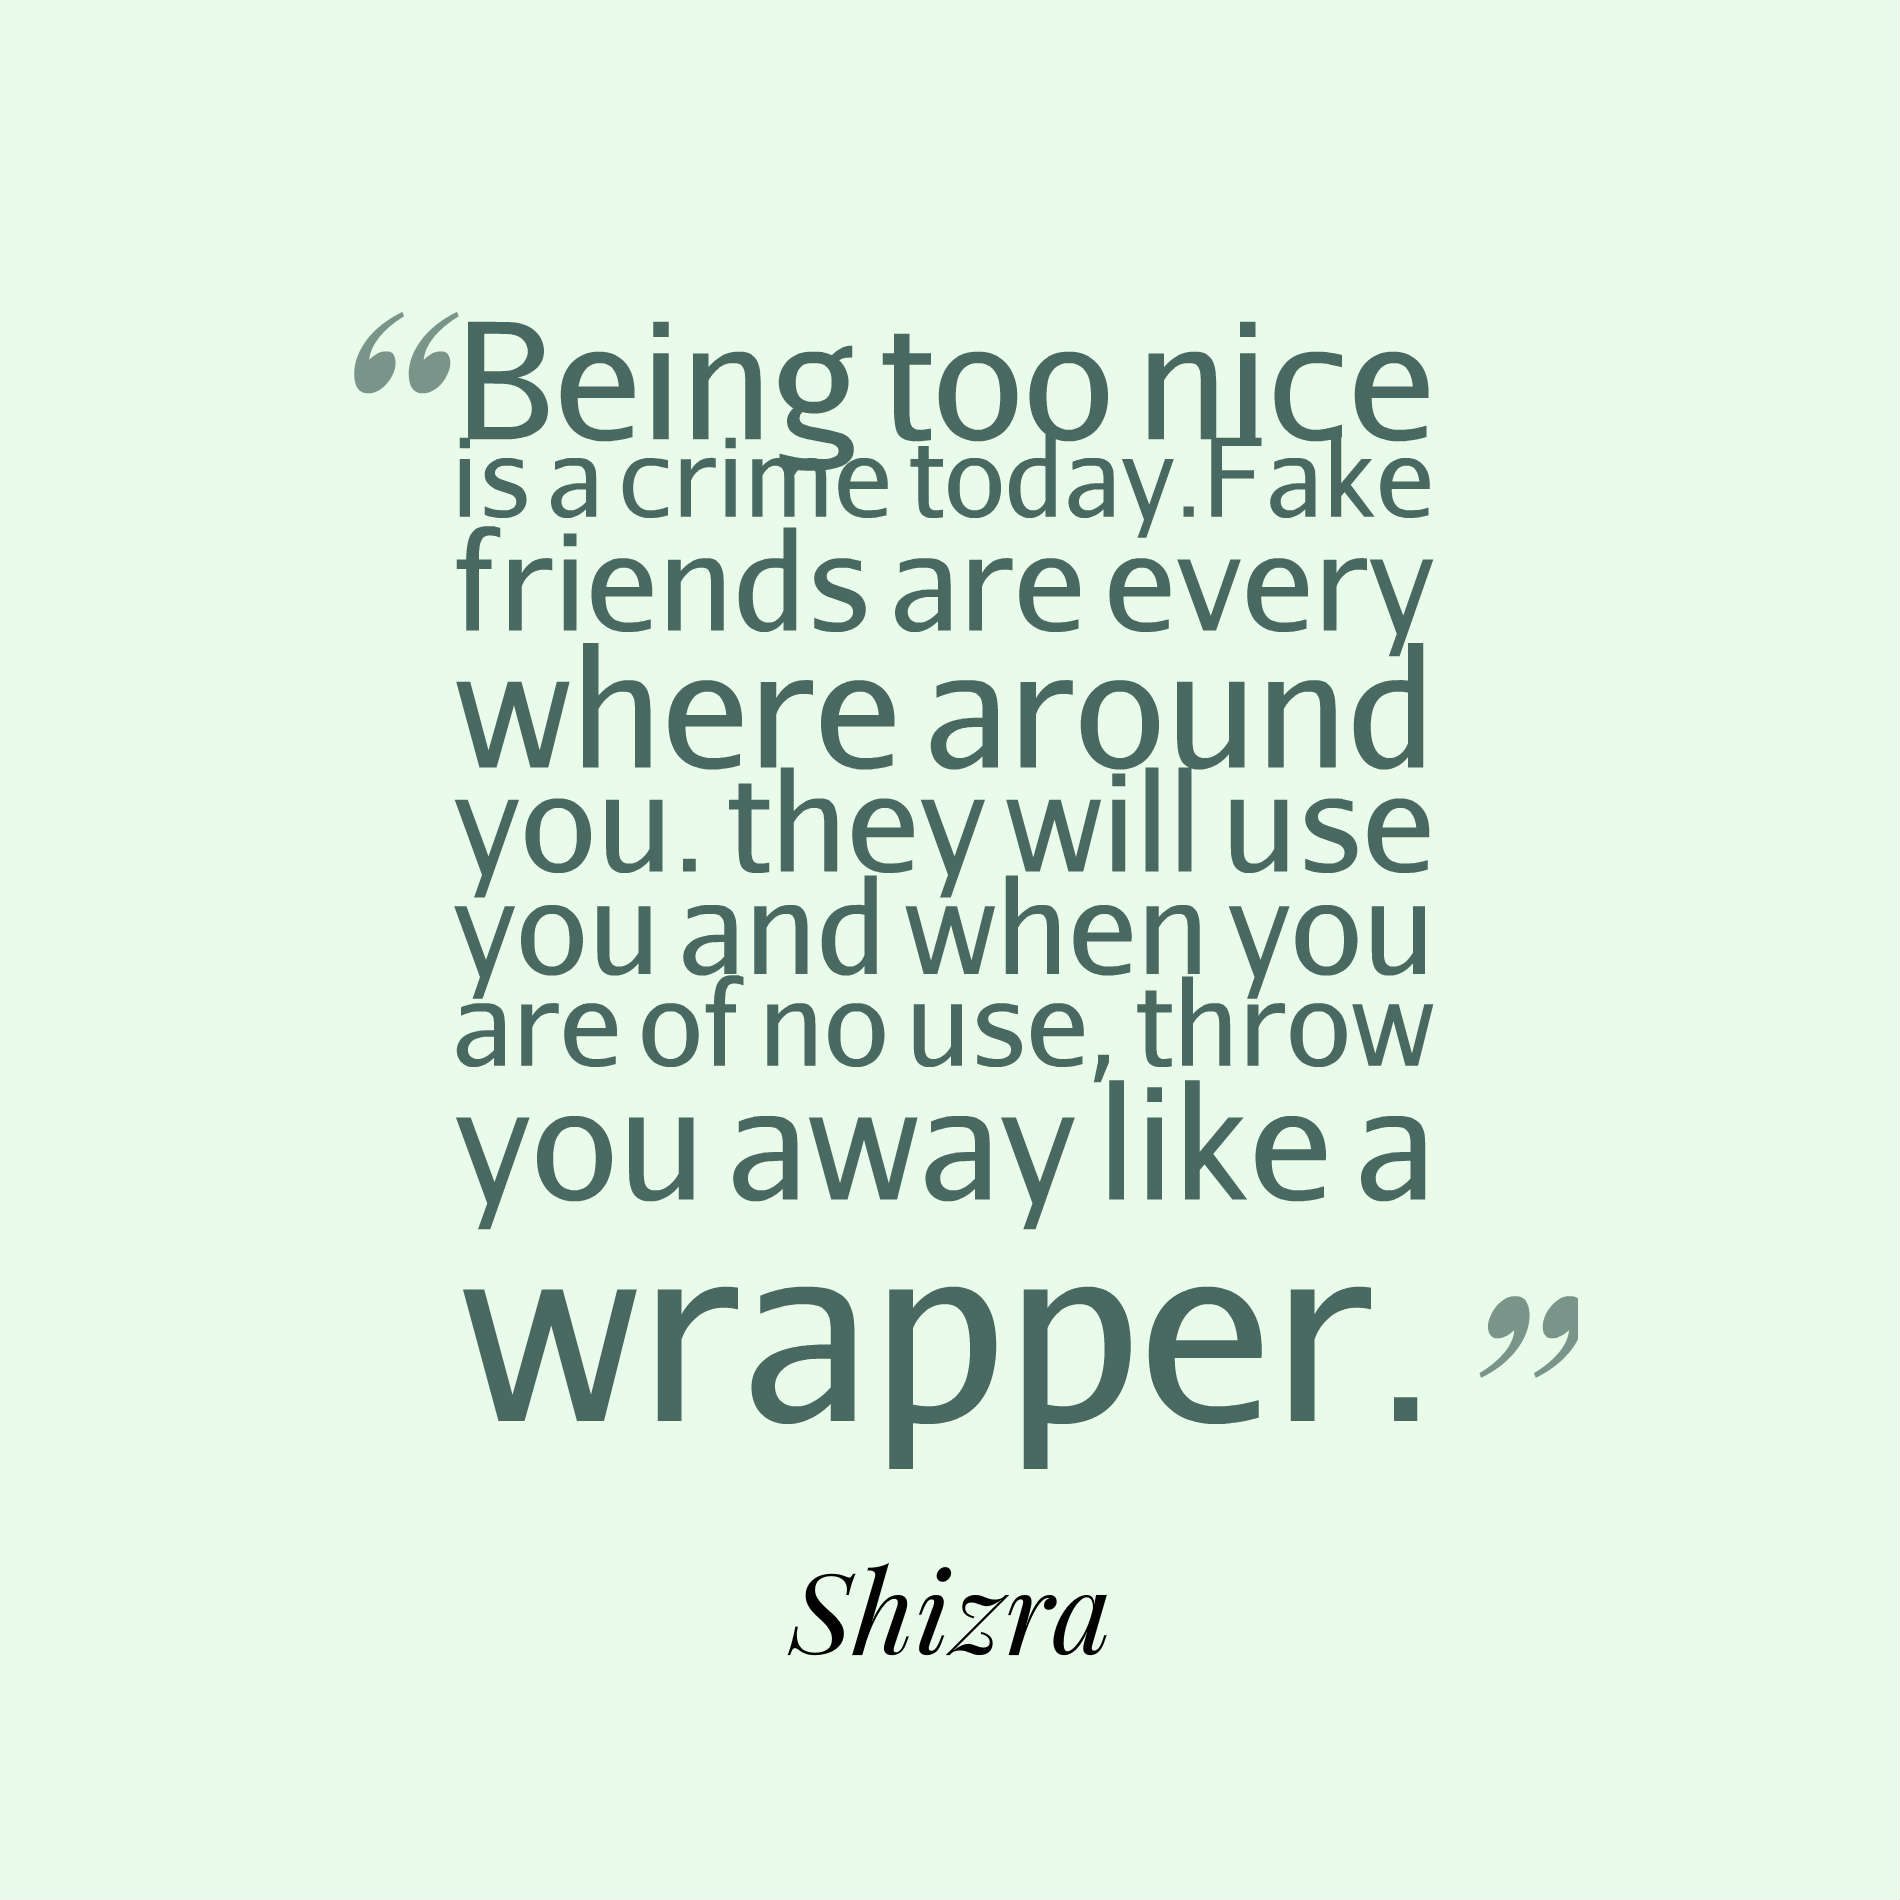 Being too nice is a crime today.Fake friends are every where around you. they will use you and when you are of no use, throw you away like a wrapper.